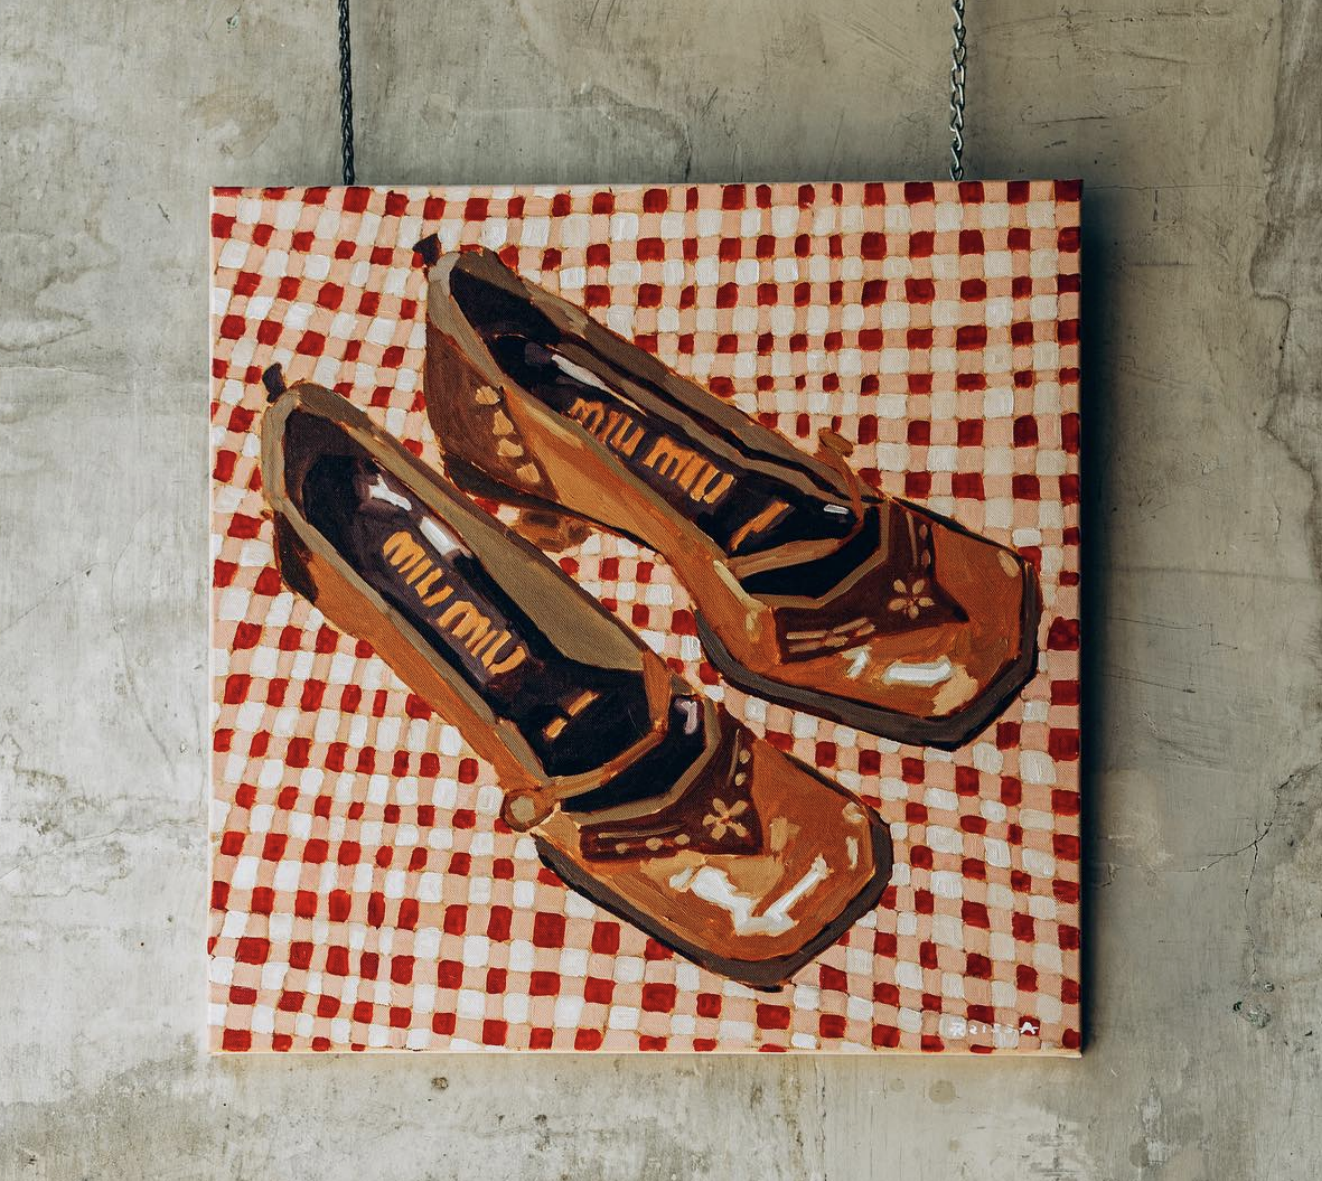 A painting showing a red pair of women's shoes on a red and white checked background.